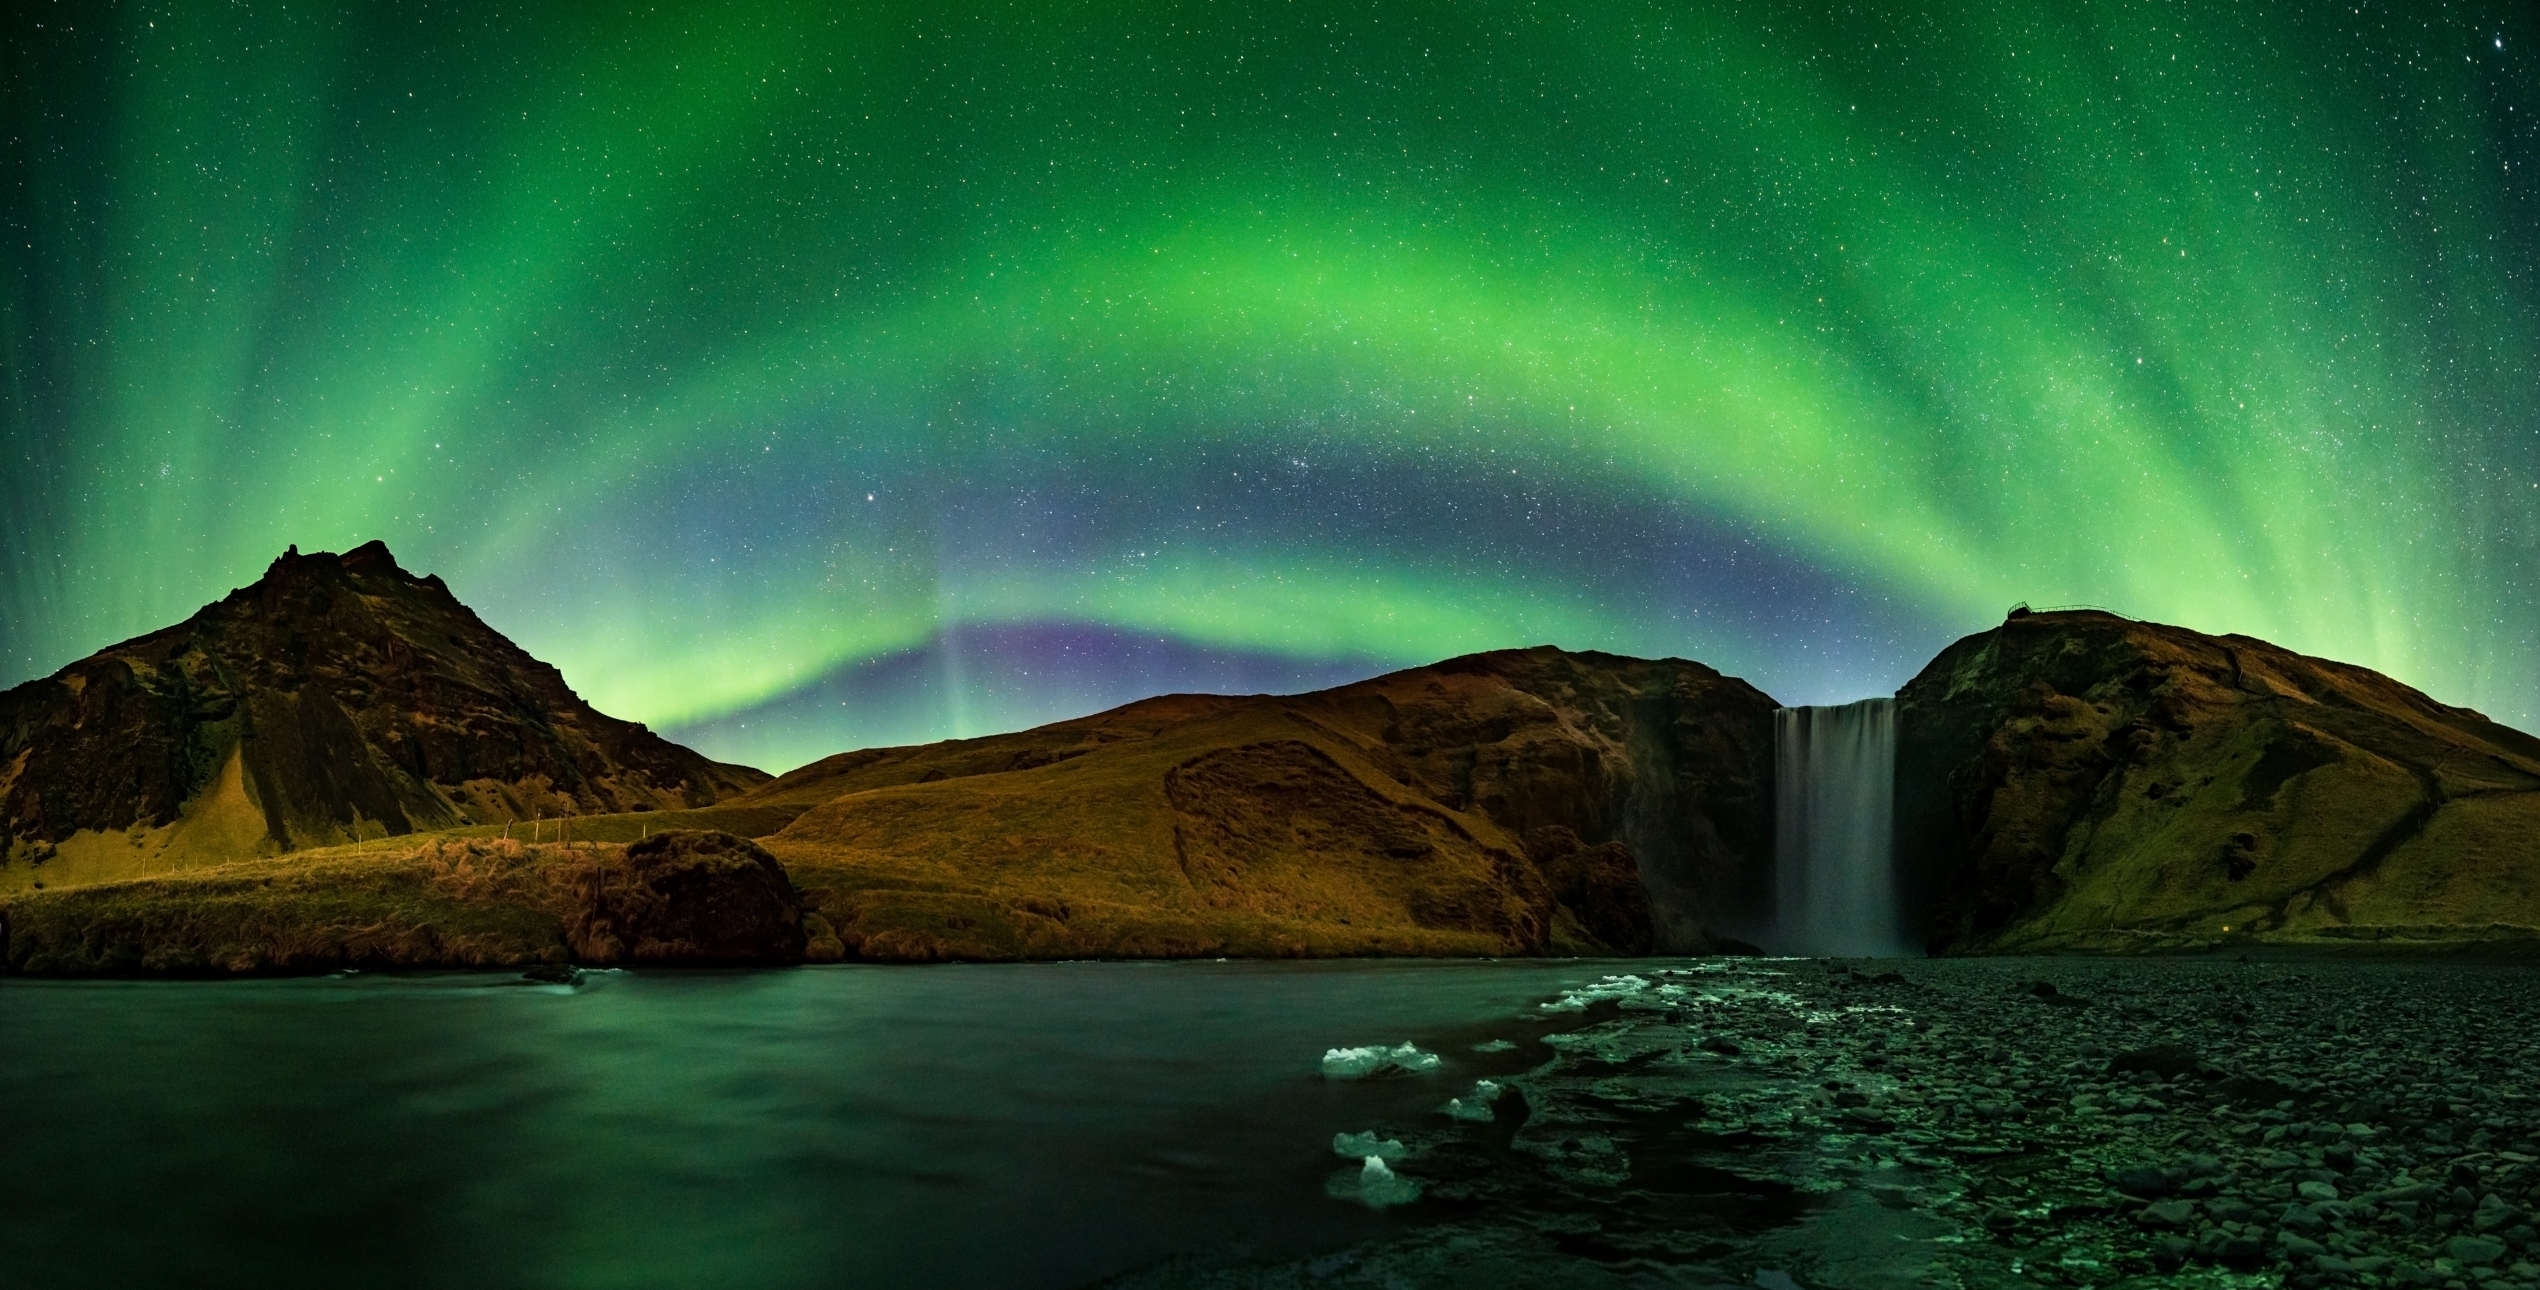 Northern lights brighten the sky above Skogafoss waterfall in South Iceland